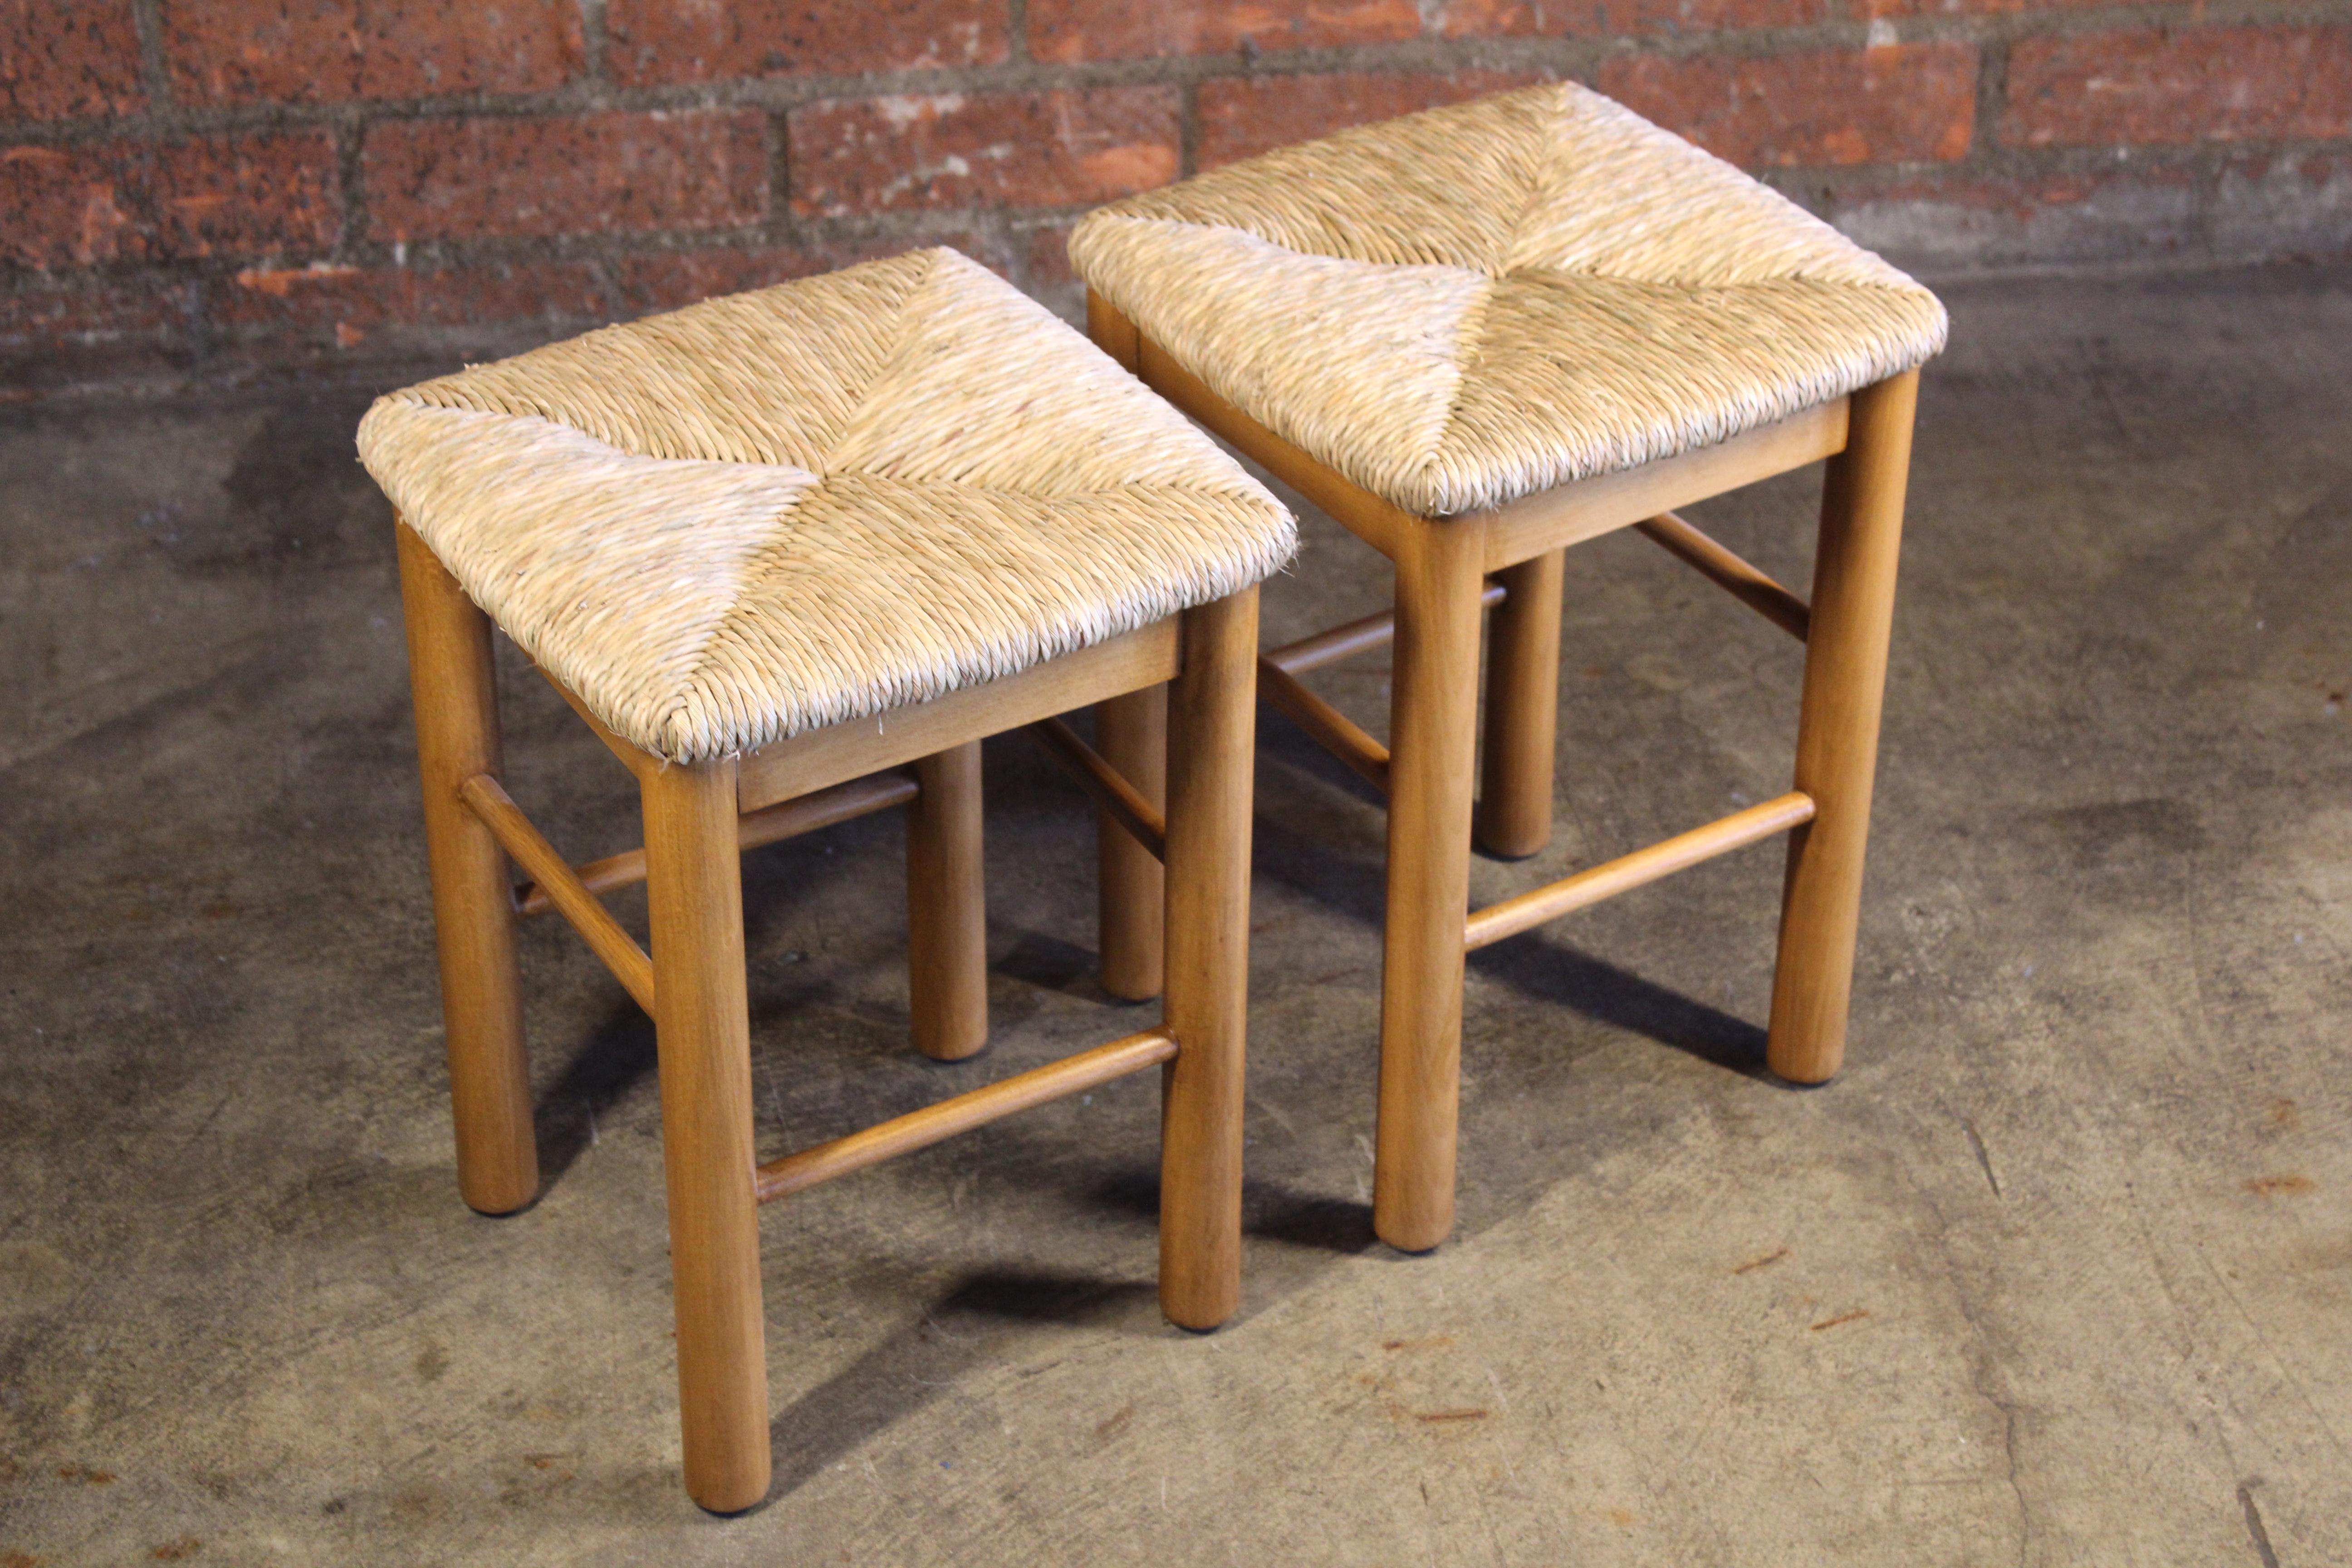 Pair of 1960s French stools with new natural rush woven seats.